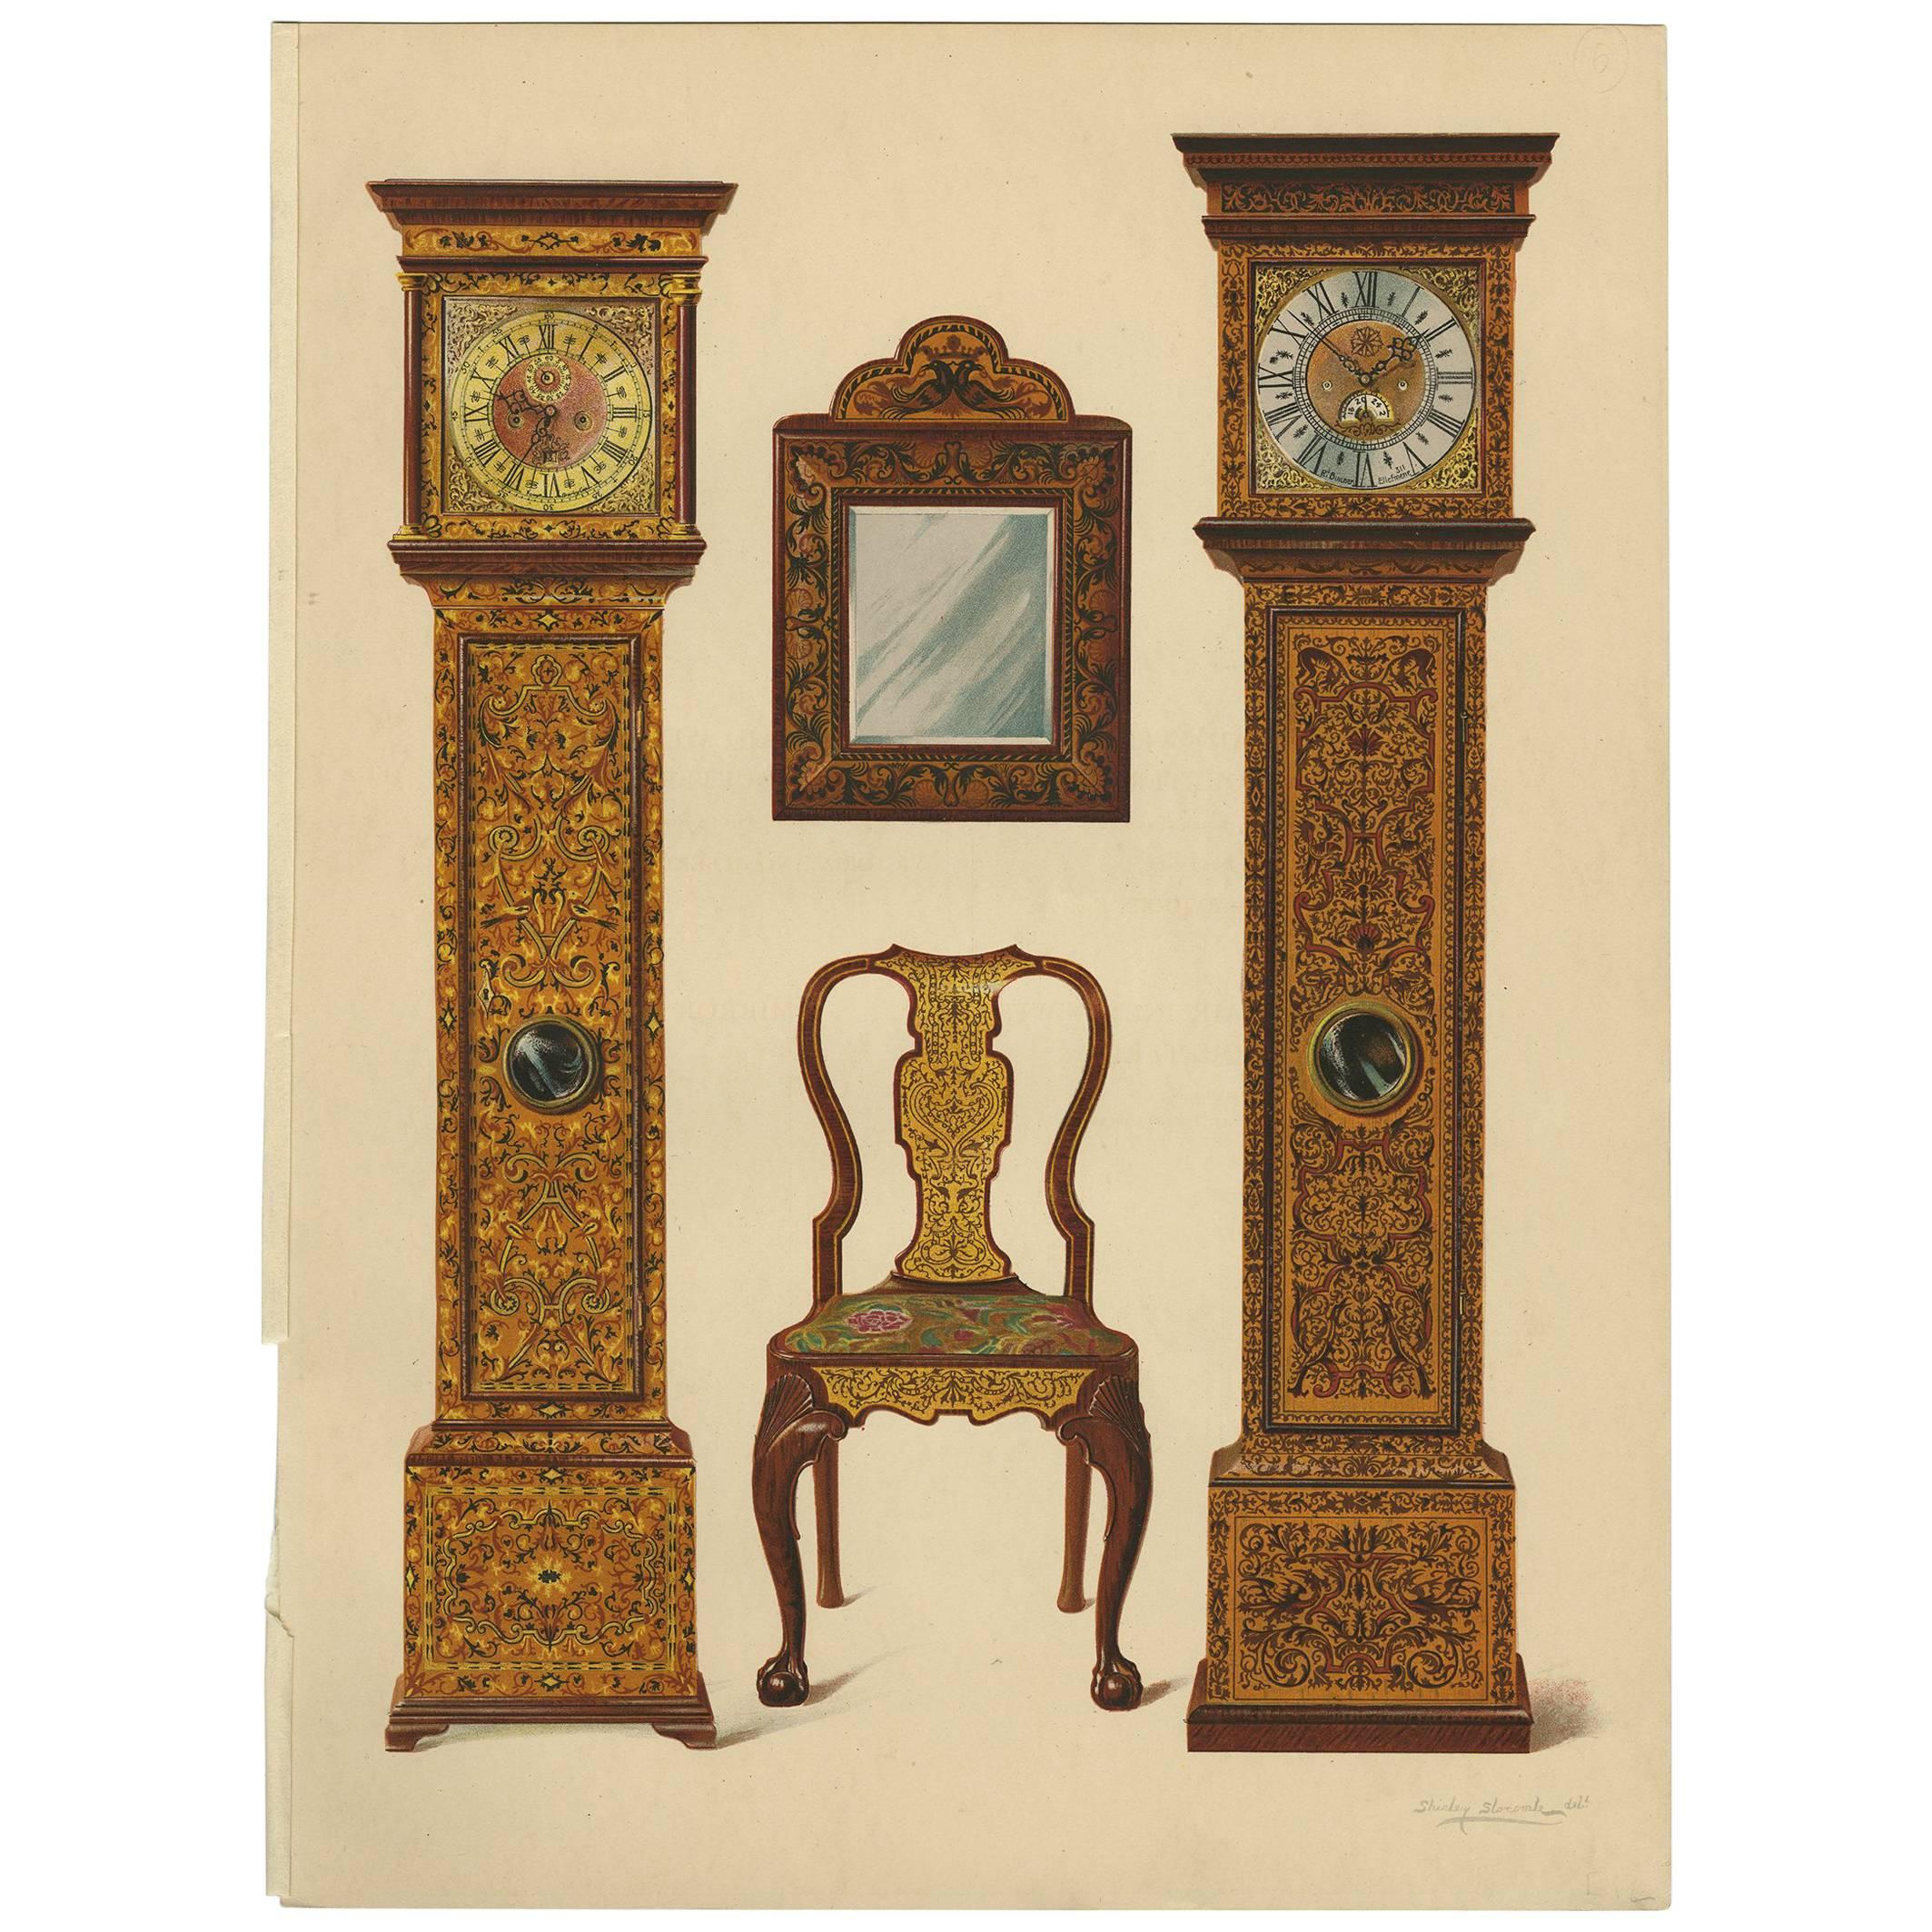 Antique Print of English Furniture 'Clocks, Mirror, Chair' by P. Macquoid, 1906 For Sale